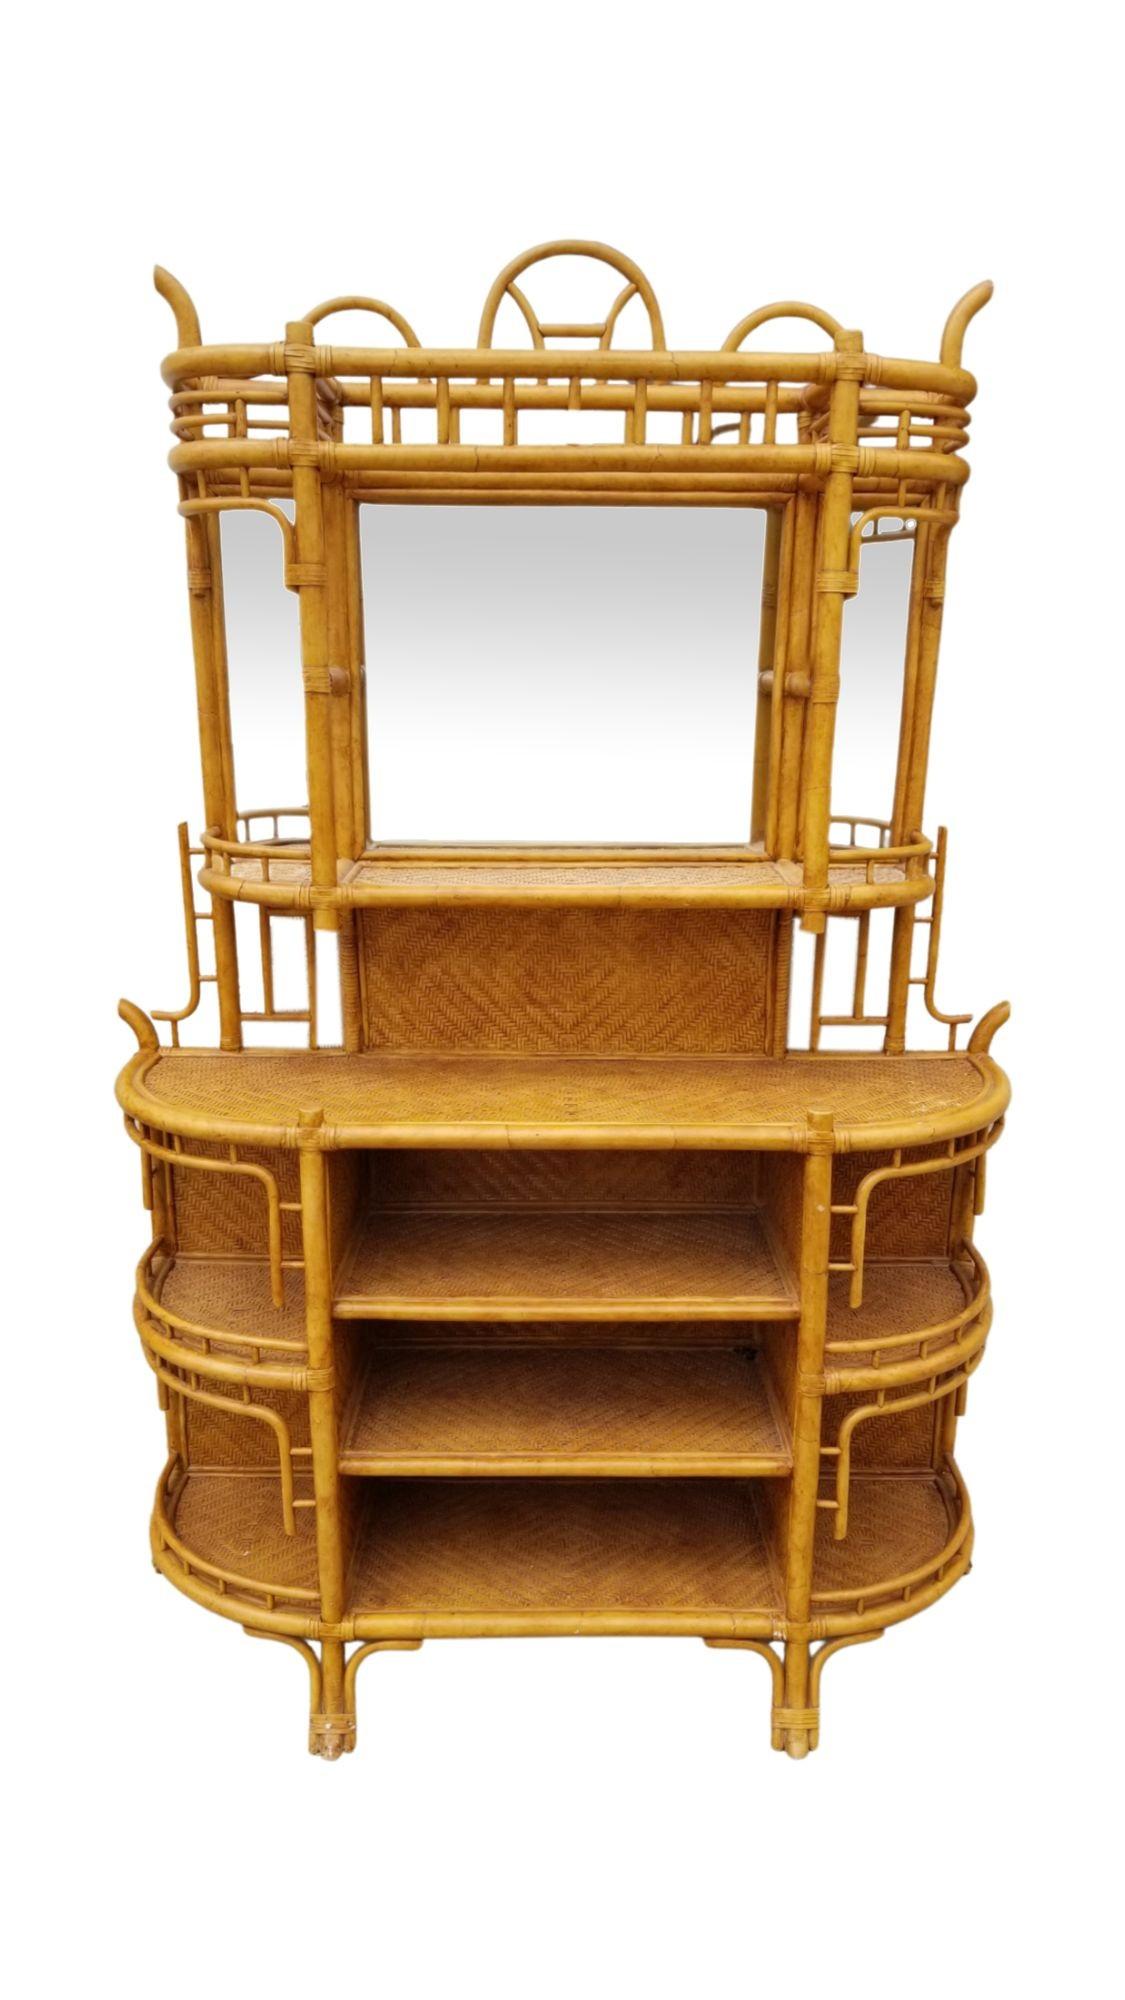 James Mont-inspired etagere is a furniture piece designed with open shelves or display tiers, typically made of wood, metal, or glass. It serves both functional and decorative purposes, offering a stylish way to showcase and organize items like